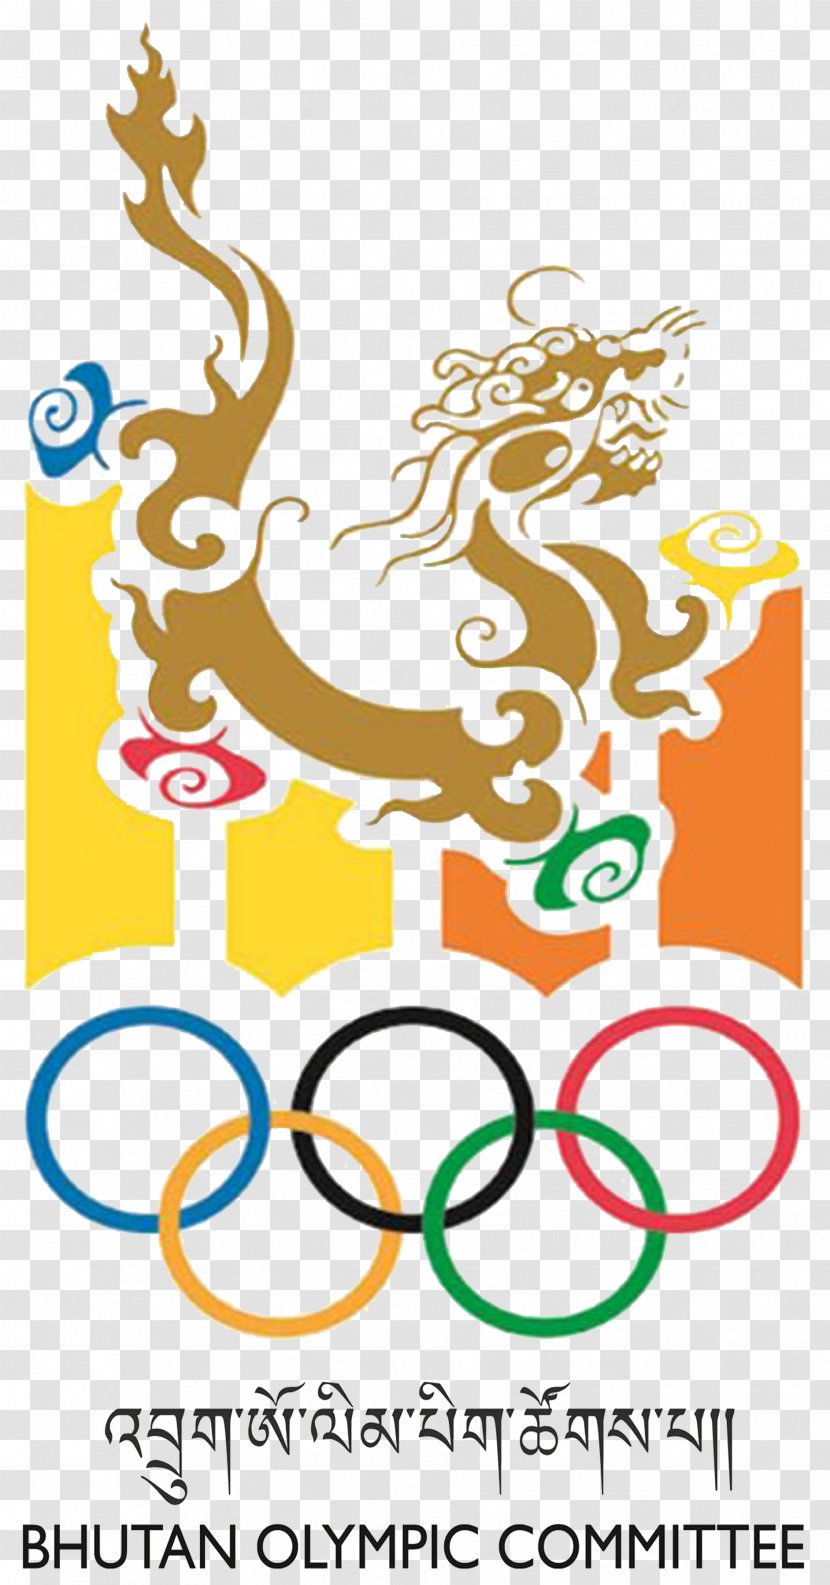 Olympic Games Bhutan International Festival Committee 2018 Winter Olympics 1998 - National Paralympic Transparent PNG